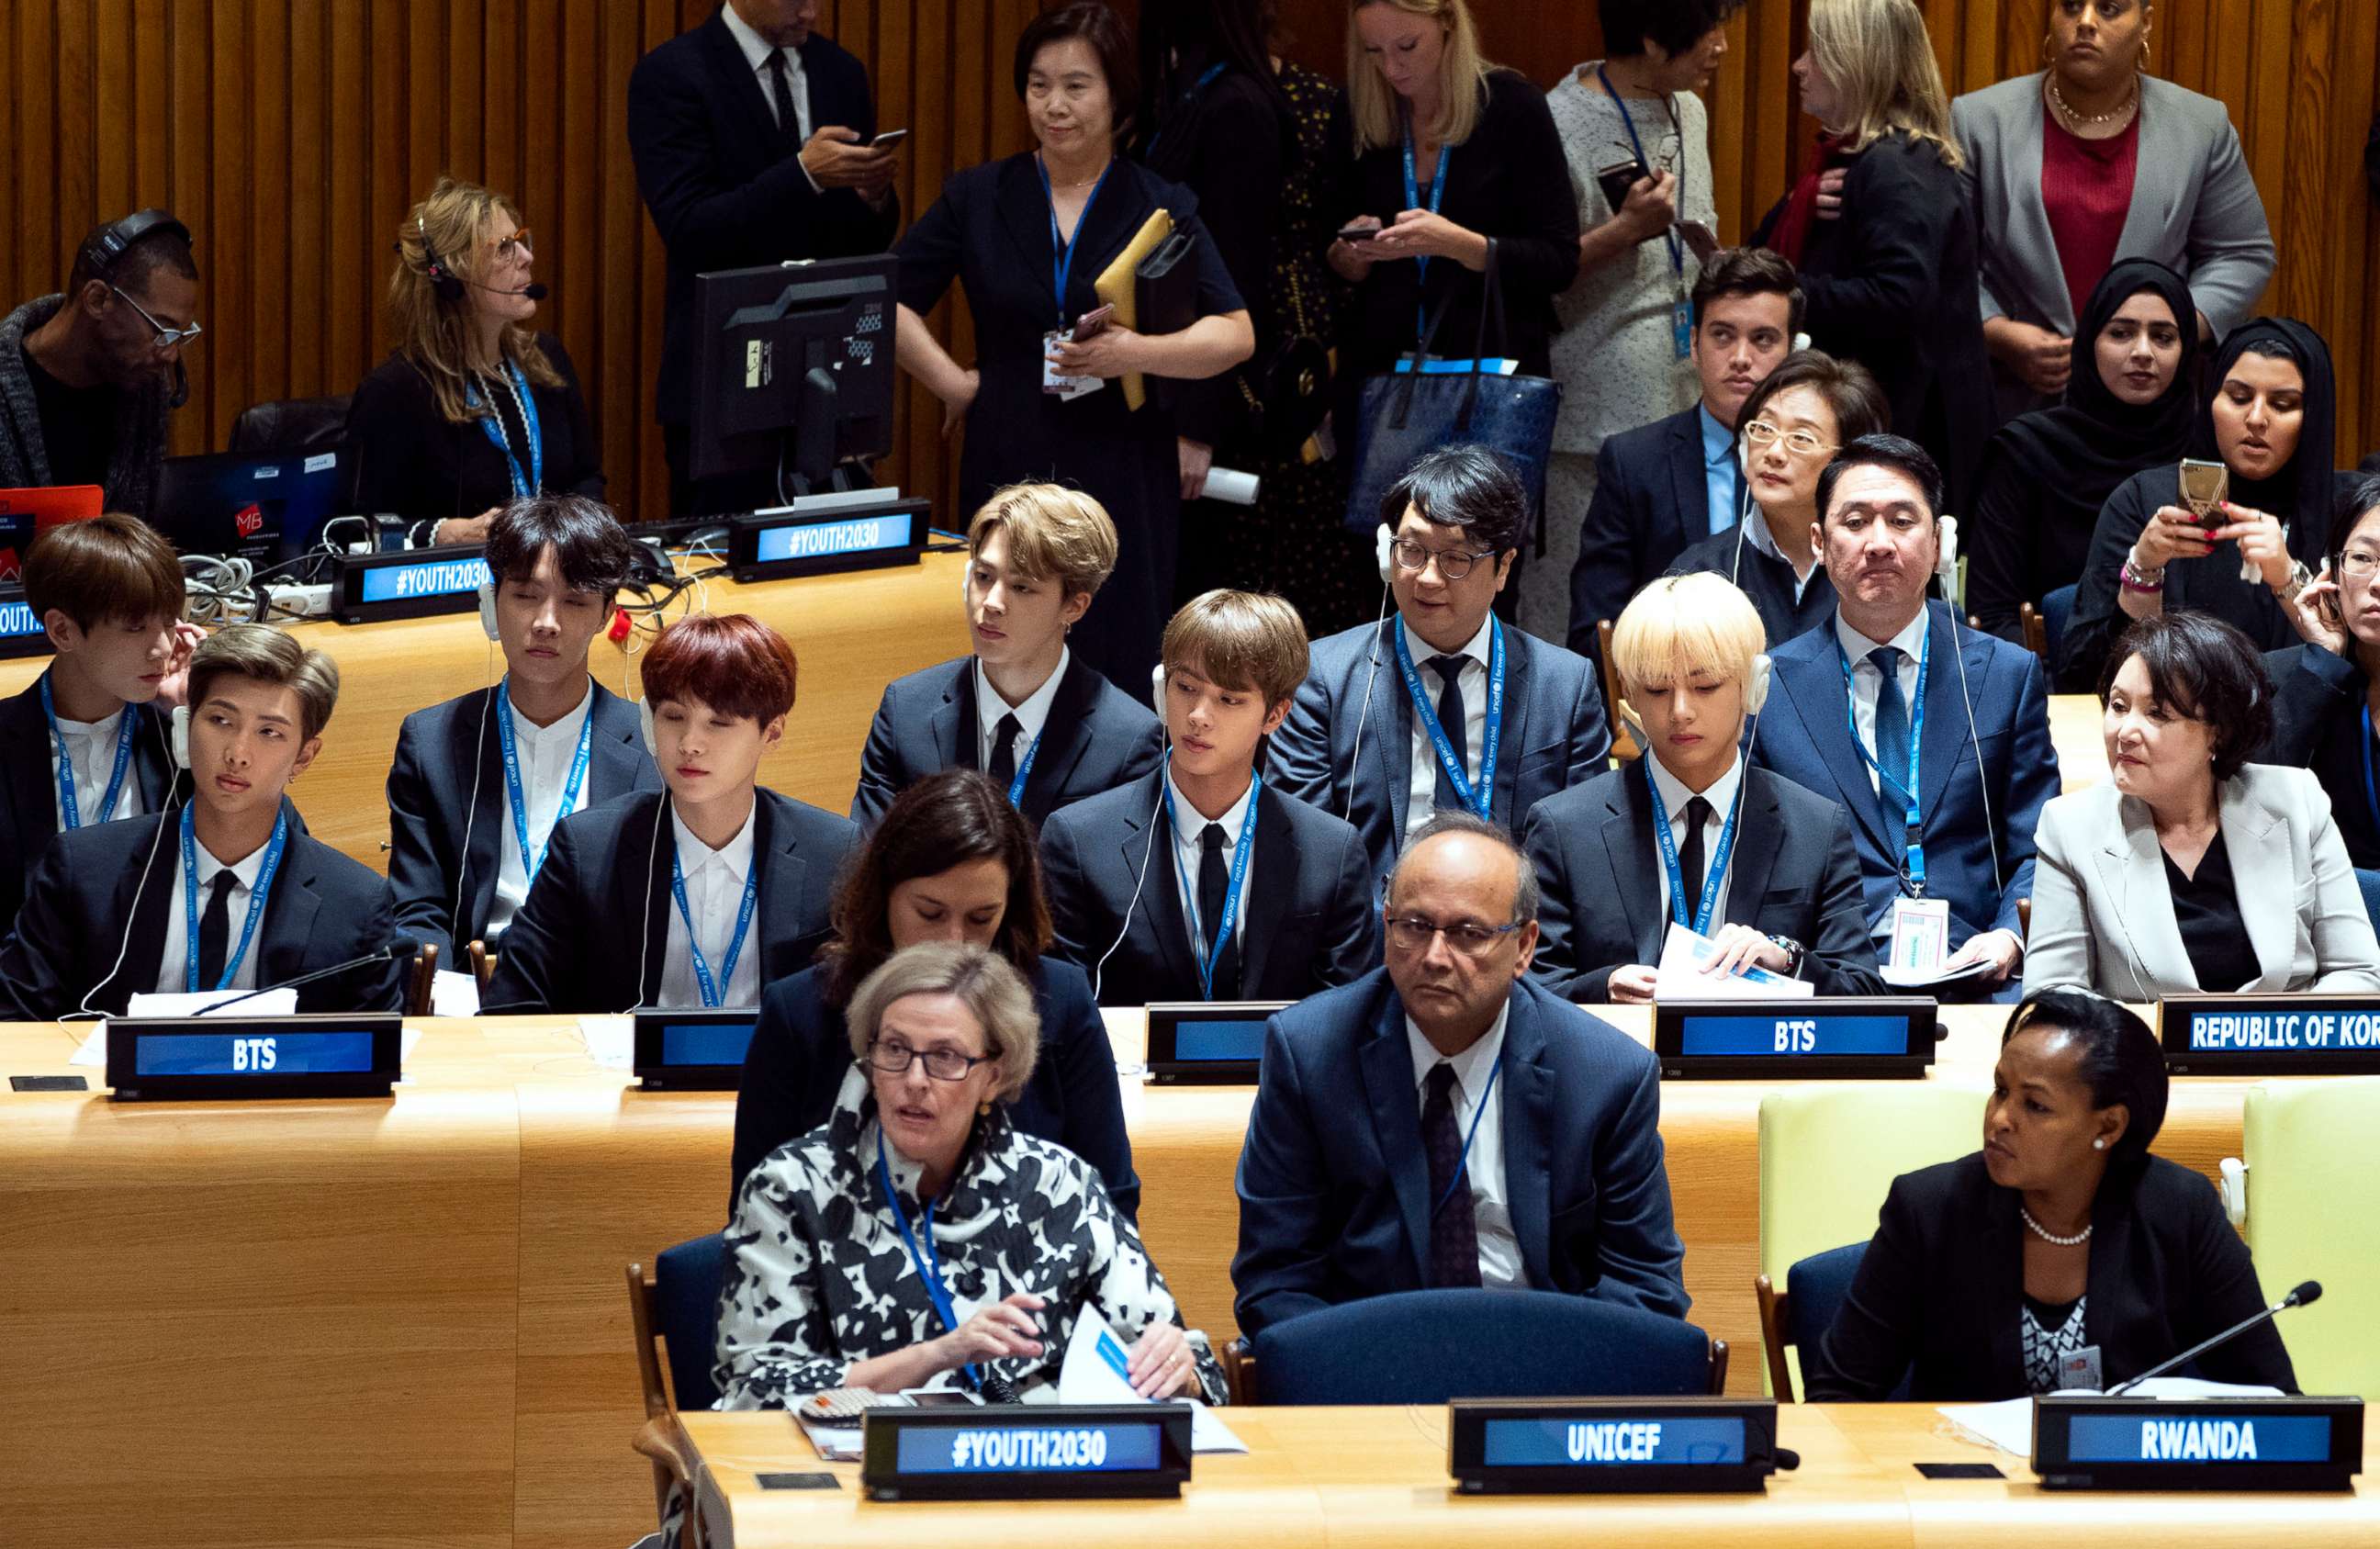 K-pop stars BTS perform, speak about youth issues, climate change at UN  General Assembly - ABC News